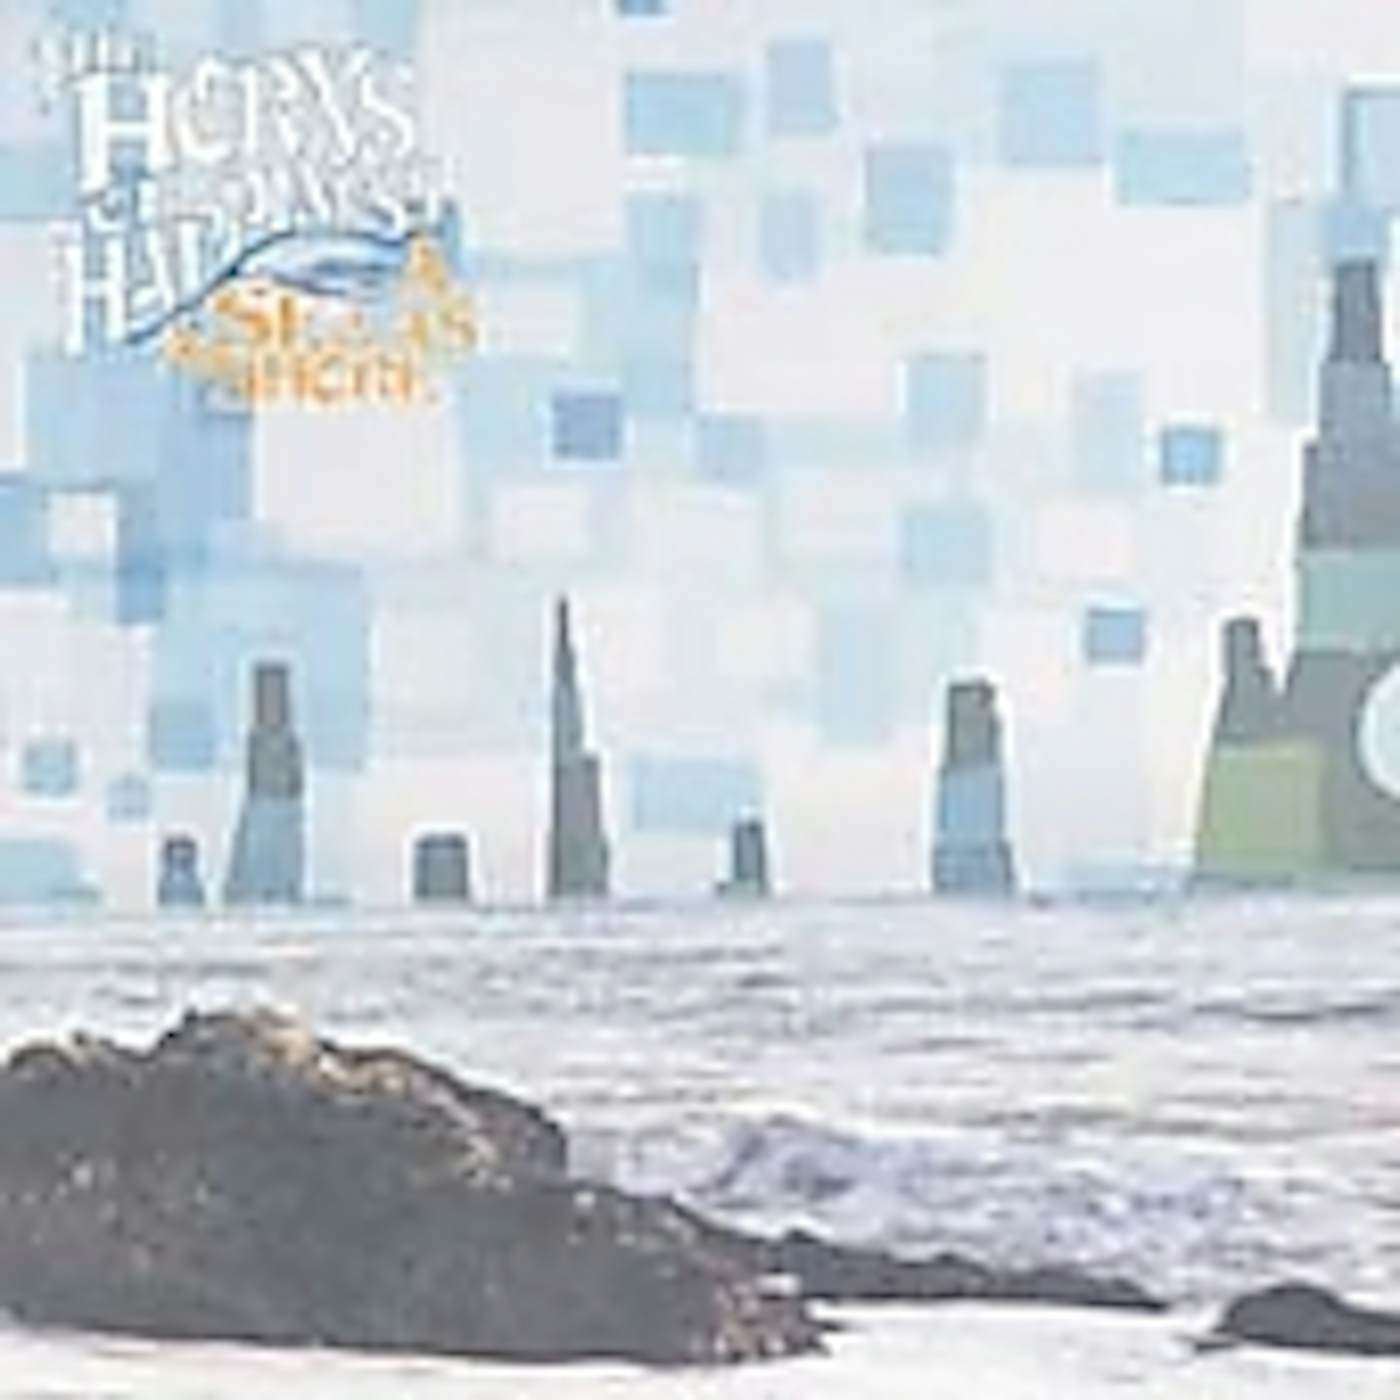 The Horns Of Happiness SEA AS A SHORE CD